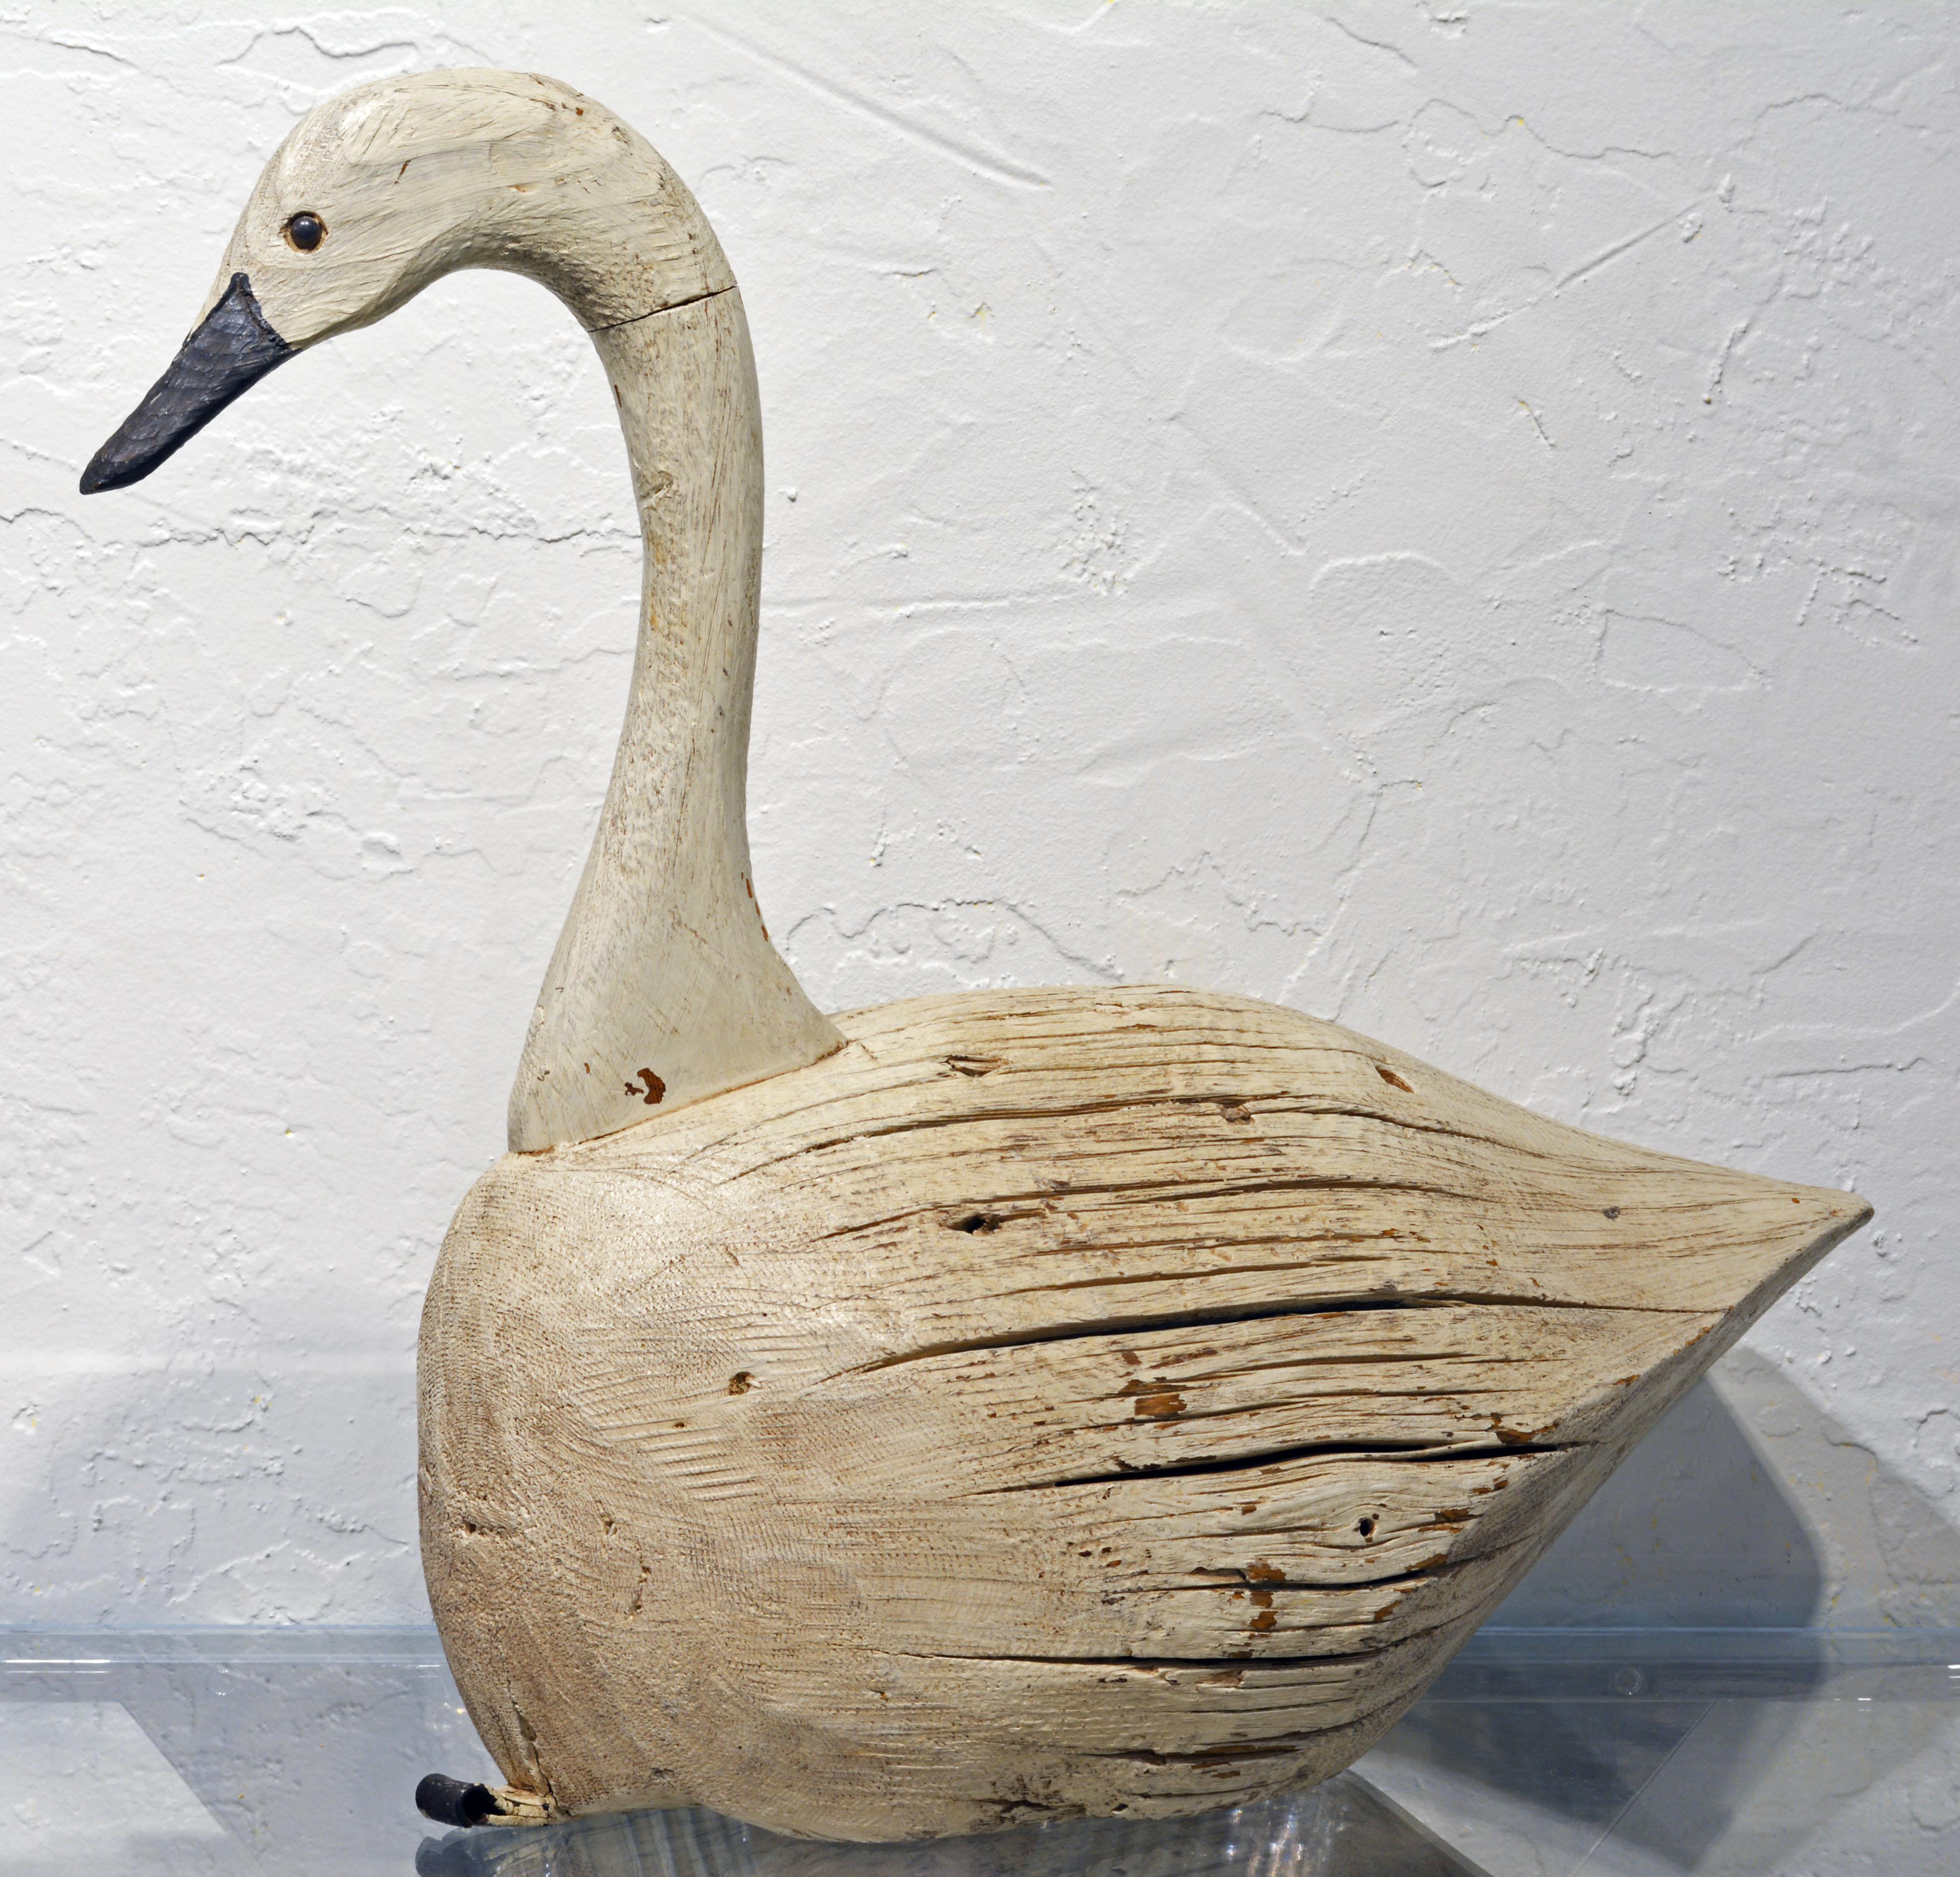 Created in the rustic Folk Art style this large carved and painted decoy swan makes a beautiful sculptural accent in a country home.